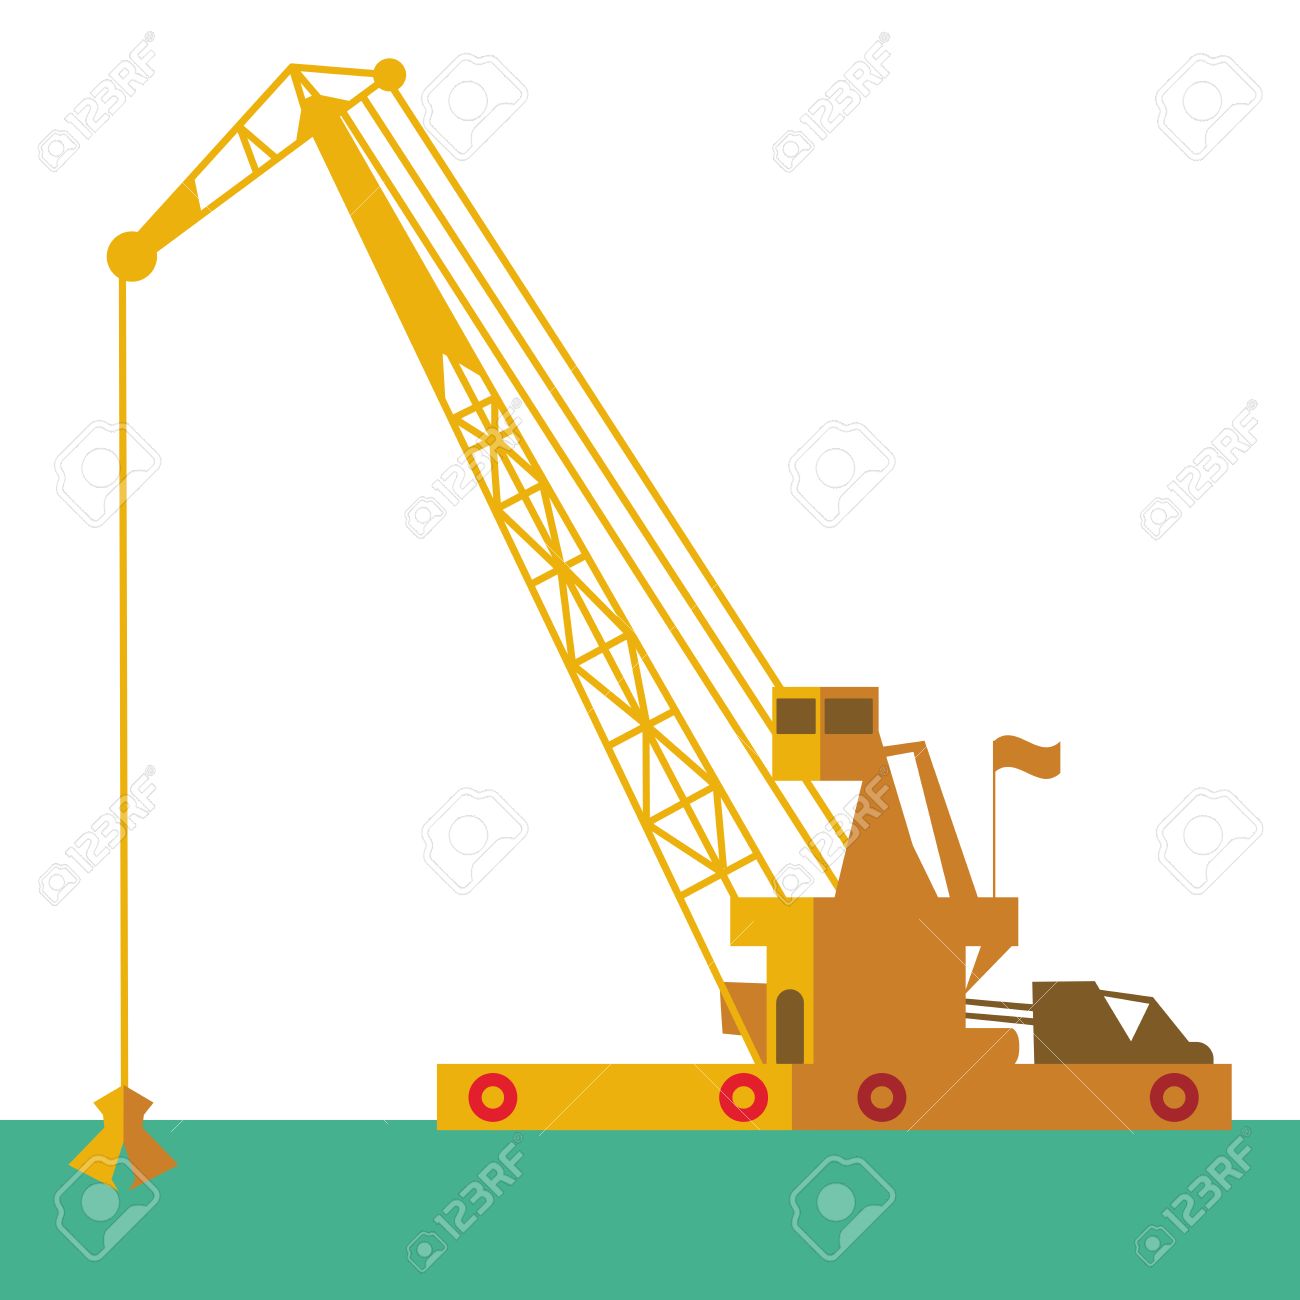 136 Dredging Stock Illustrations, Cliparts And Royalty Free.